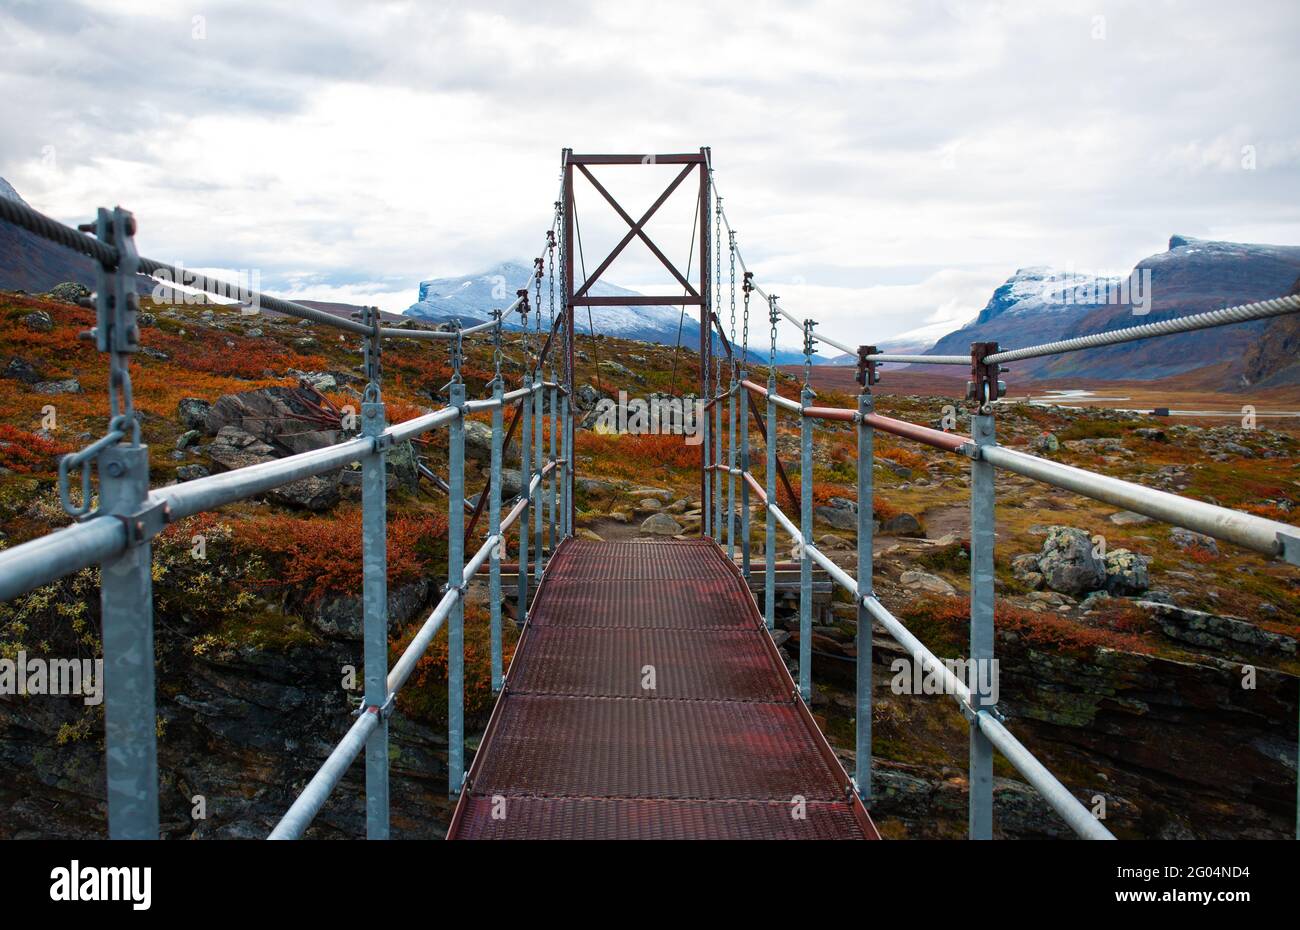 One of the bridges across the streams of Kungsleden trail between Salka and Singi, Lapland, Sweden Stock Photo